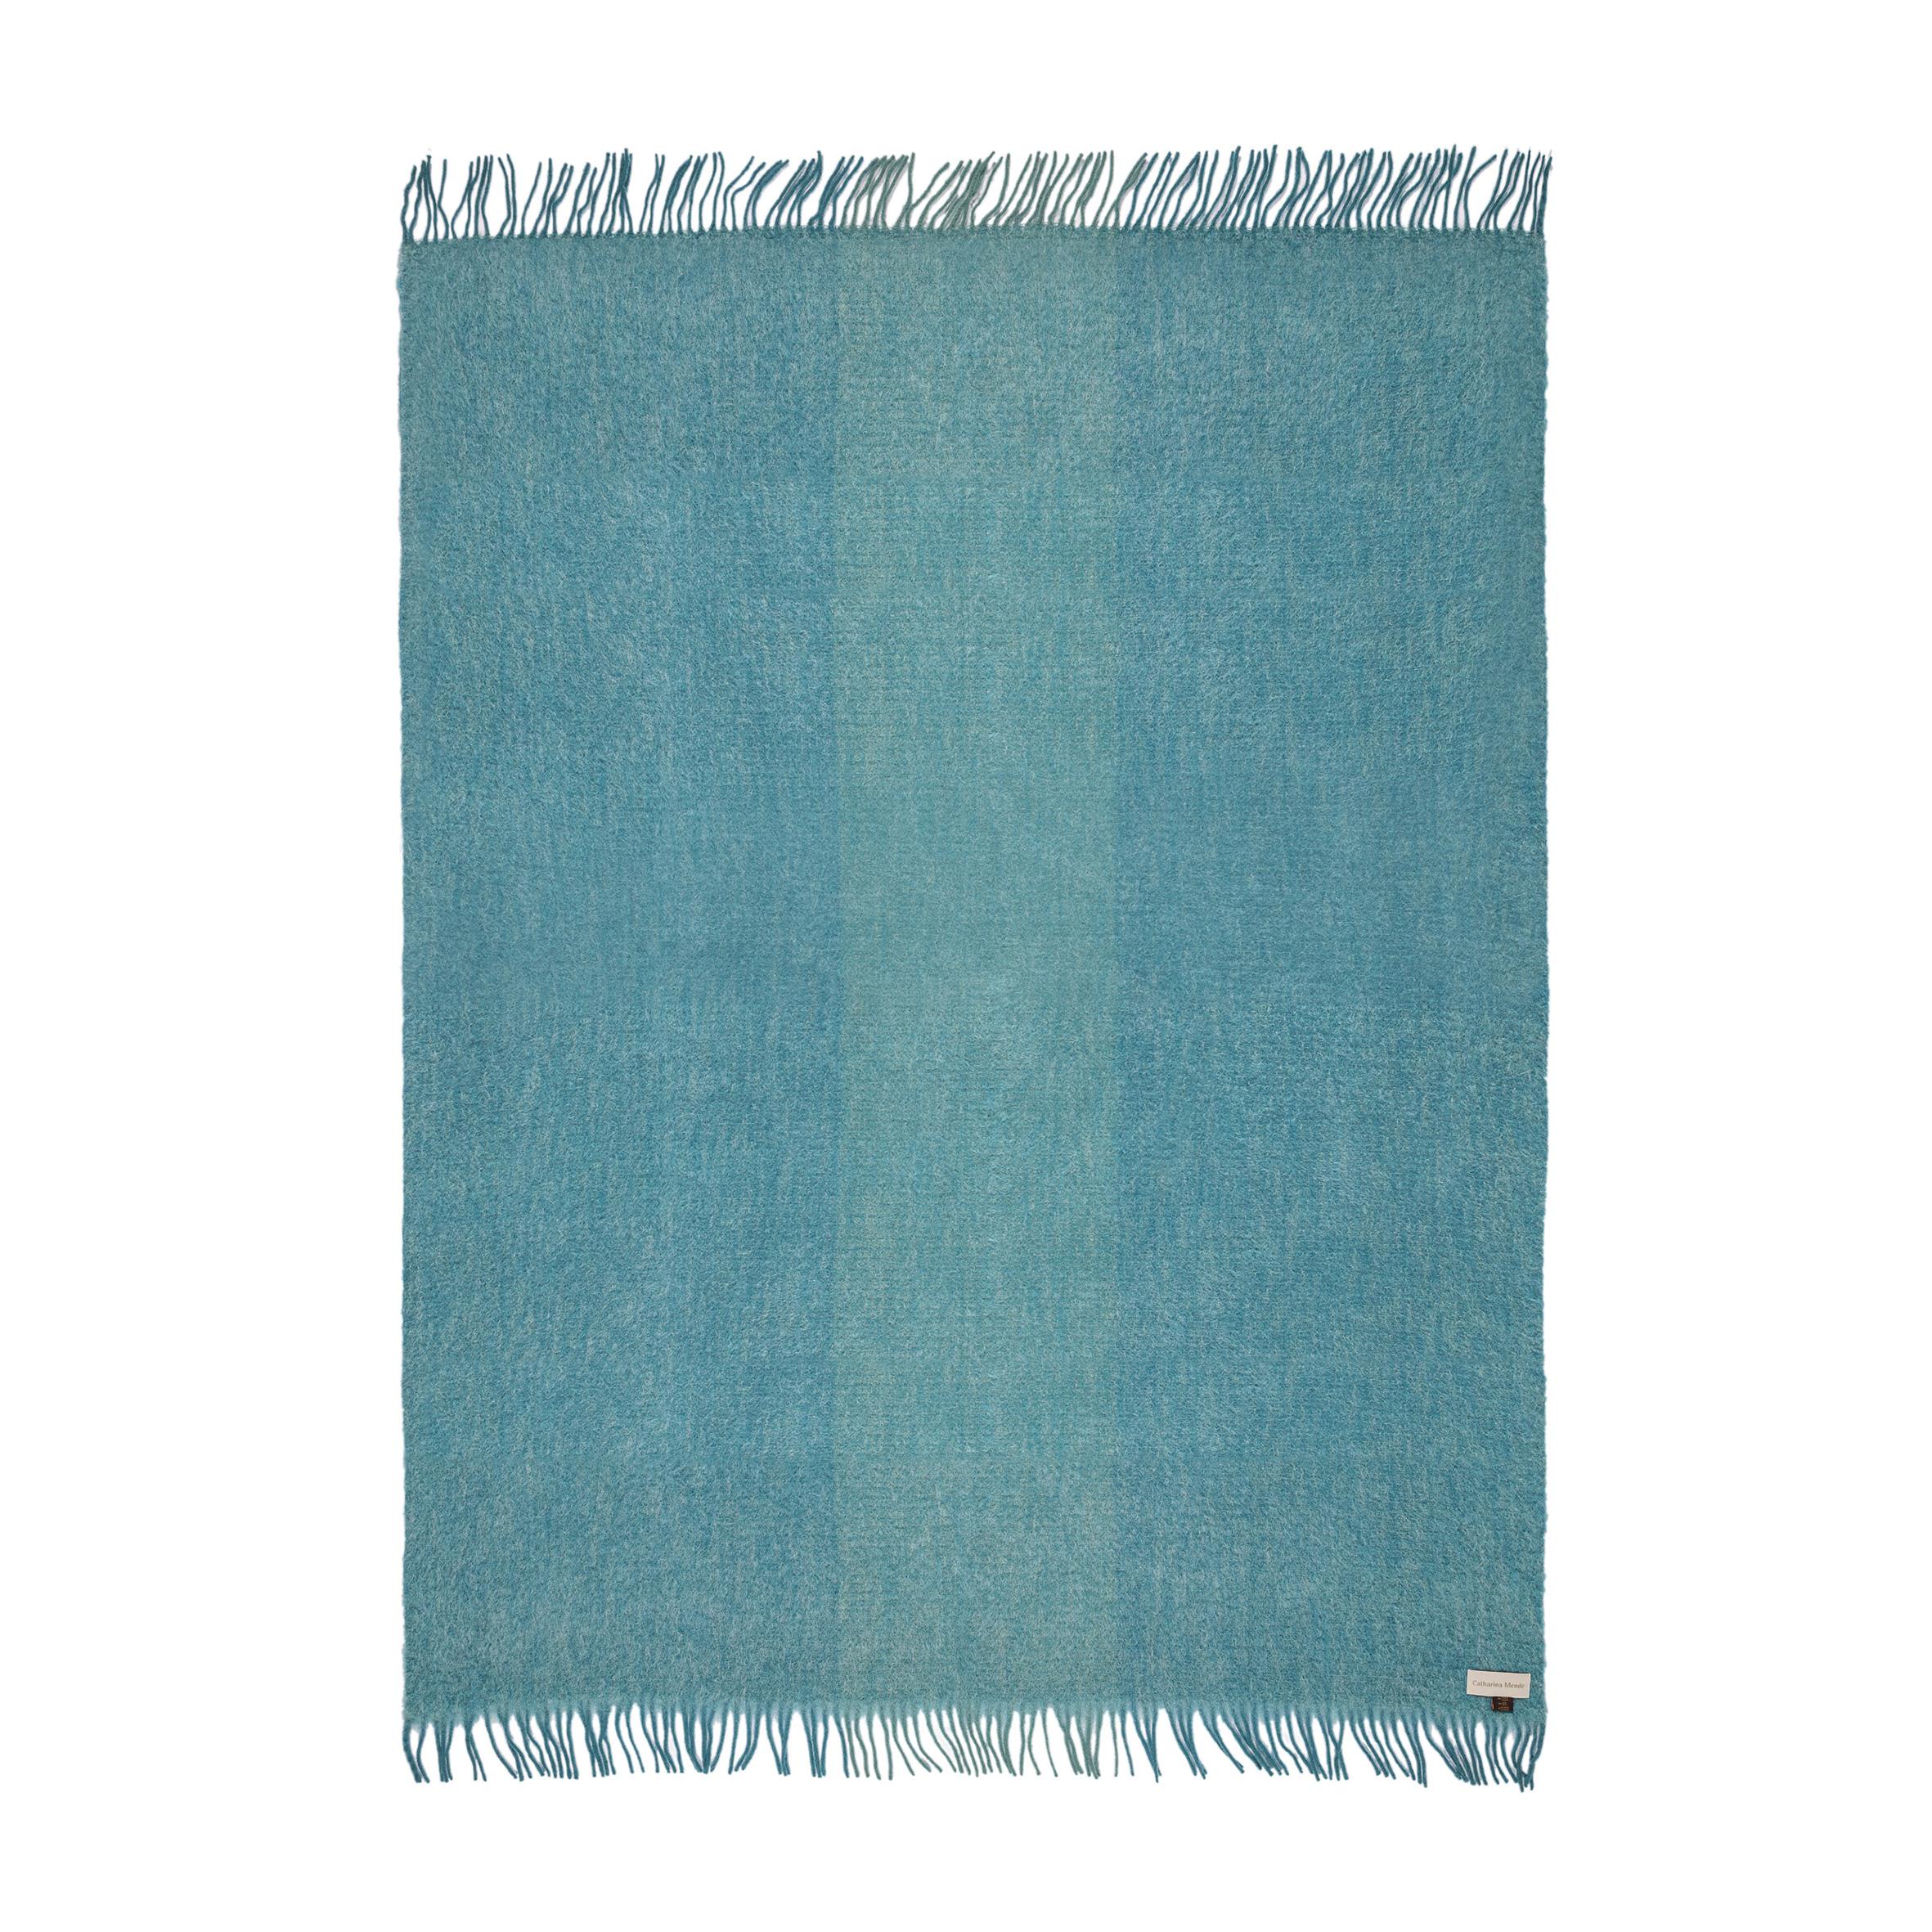 Spanish Mohair Blanket Turquoise Woven of Mohair and Wool by Catharina Mende For Sale